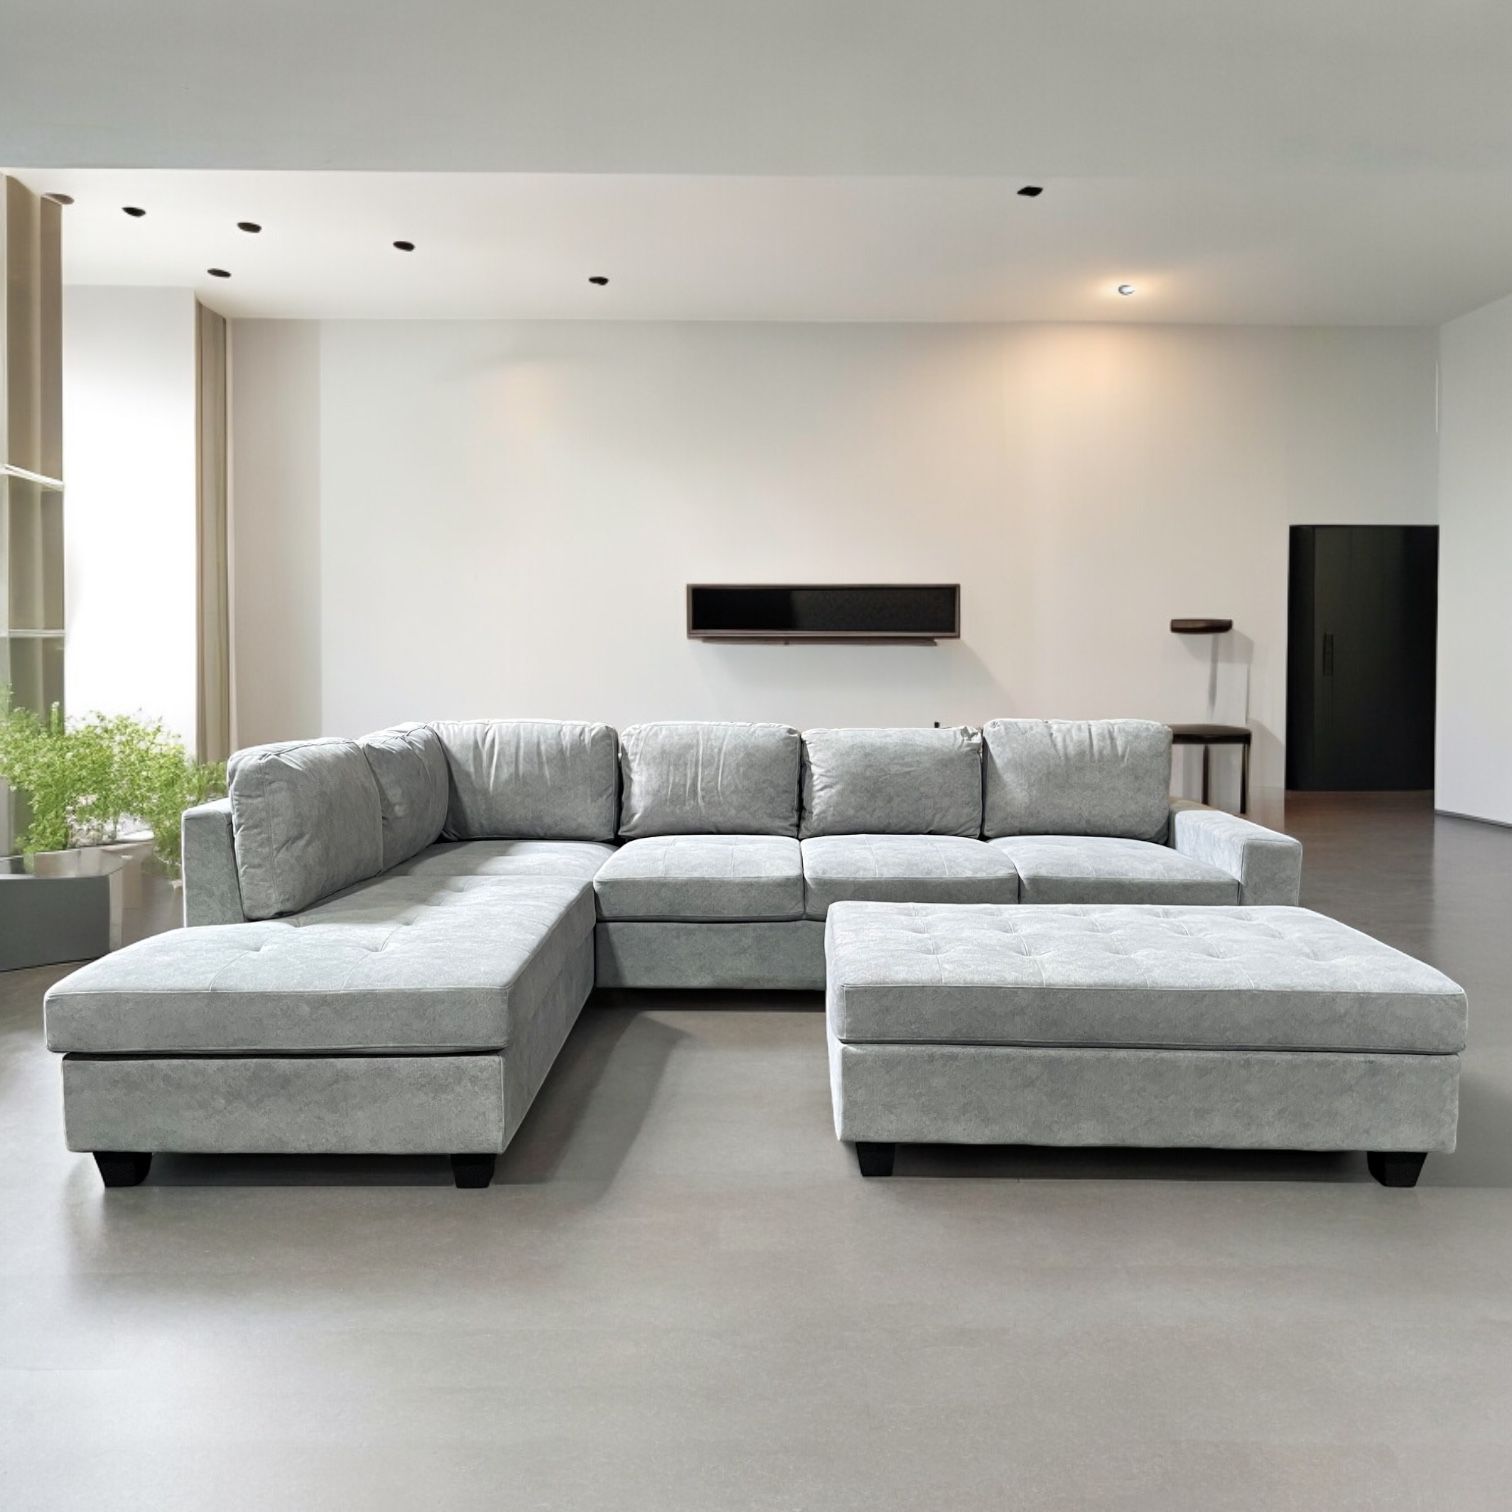 🏷WAREHOUSE CLEARANCE | NEW Fabric Chaise Sectional Sofa with Storage Ottoman, Light Gray 💥